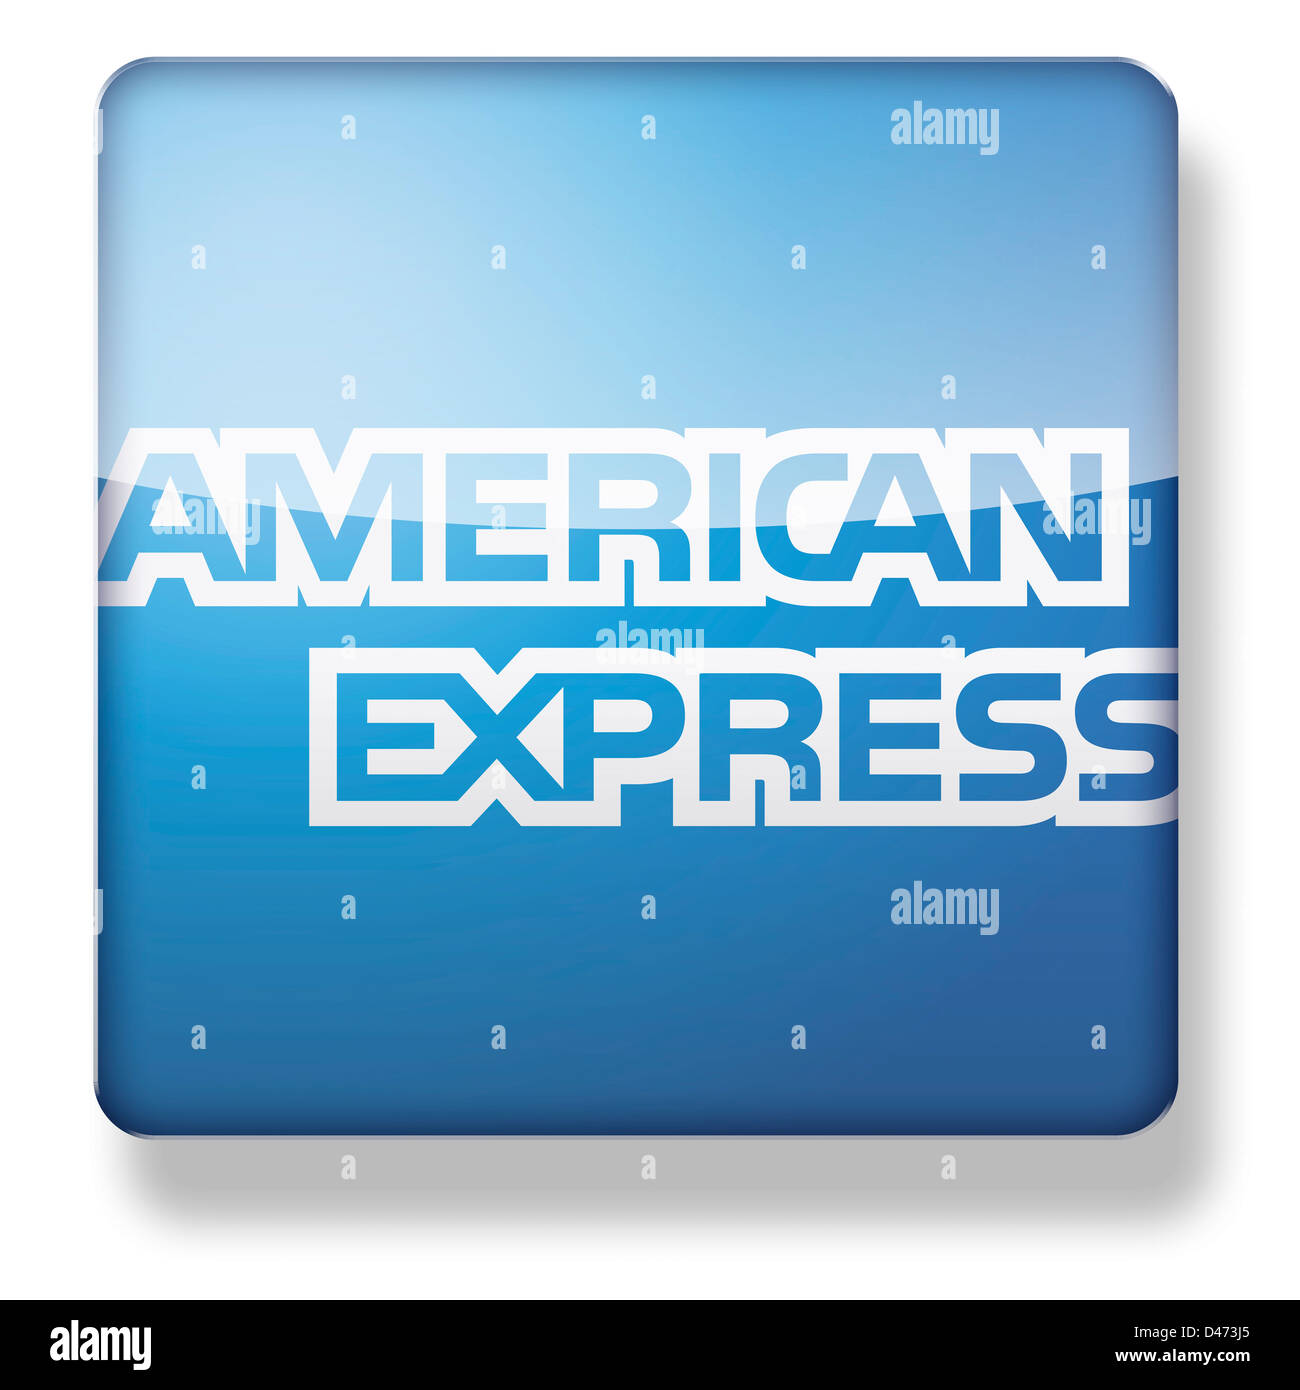 American Express logo as an app icon. Clipping path included. Stock Photo